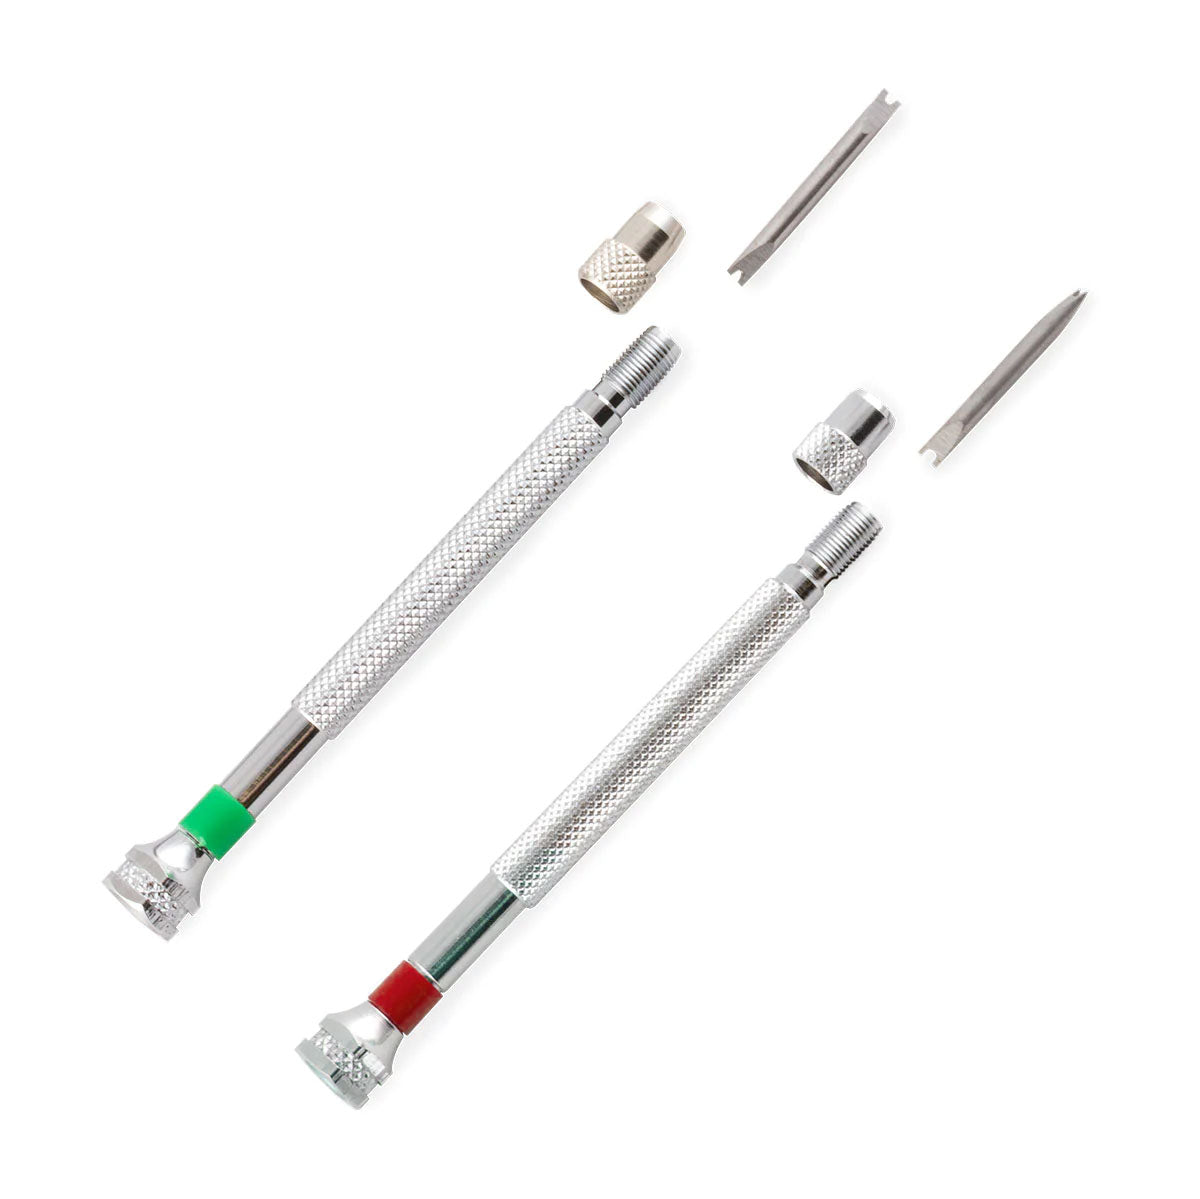 Hublot - 2 screwdrivers for strap / bezel / buckle (1 and 1.5mm)